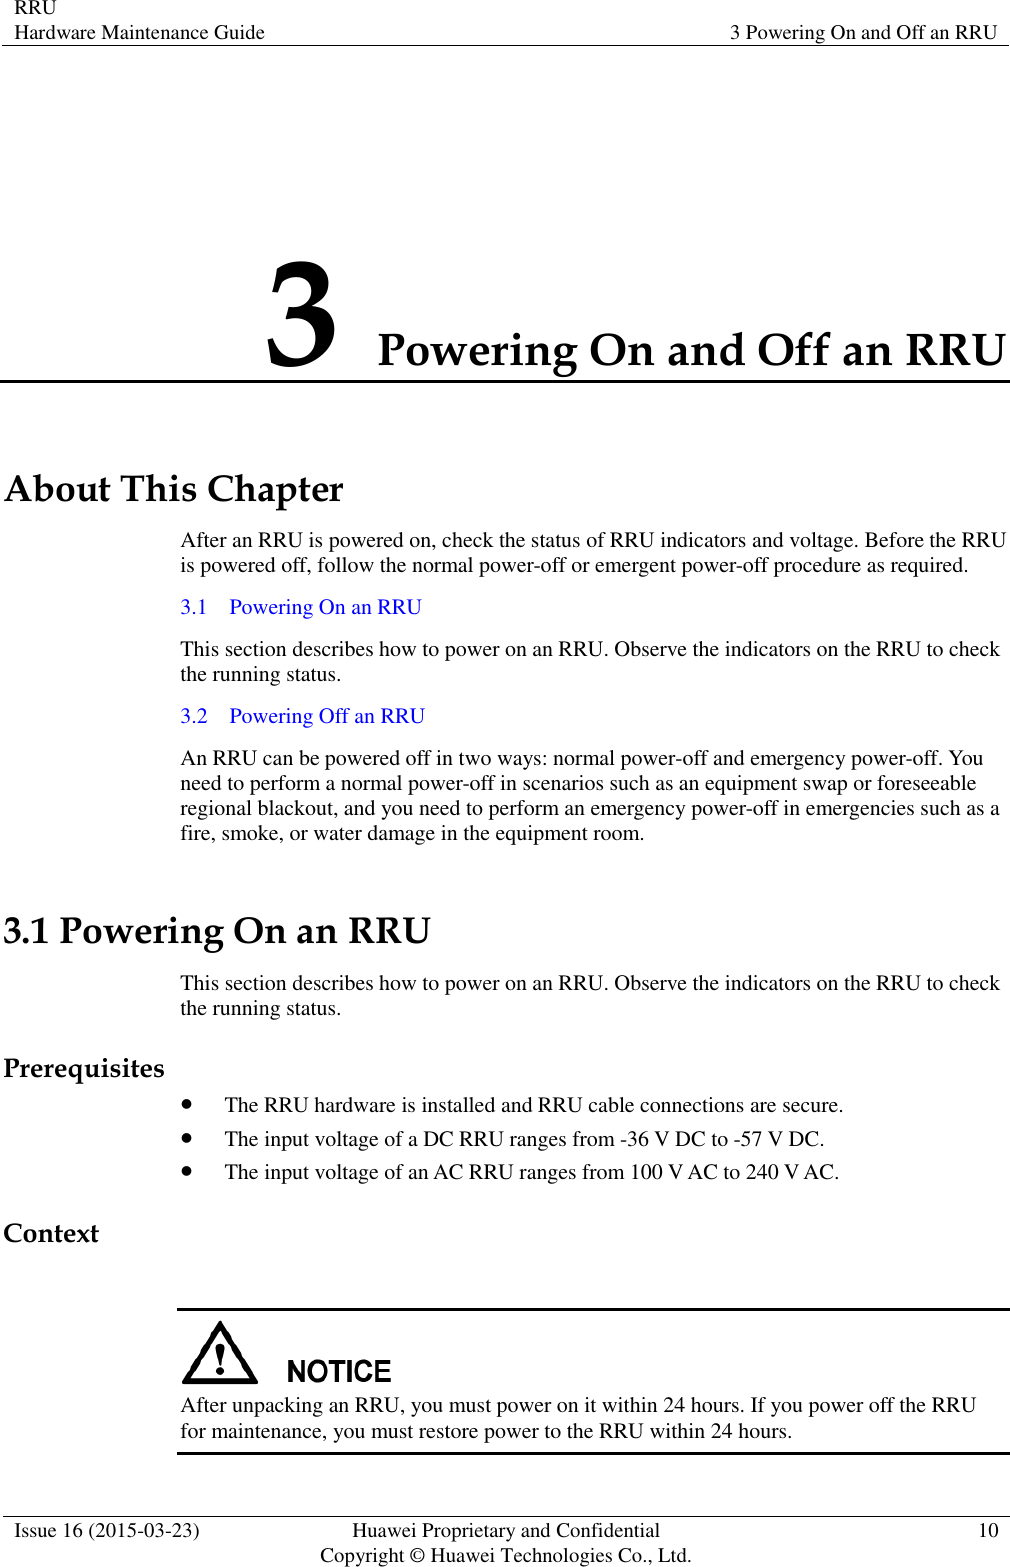 RRU Hardware Maintenance Guide 3 Powering On and Off an RRU  Issue 16 (2015-03-23) Huawei Proprietary and Confidential                                     Copyright © Huawei Technologies Co., Ltd. 10  3 Powering On and Off an RRU About This Chapter After an RRU is powered on, check the status of RRU indicators and voltage. Before the RRU is powered off, follow the normal power-off or emergent power-off procedure as required. 3.1    Powering On an RRU This section describes how to power on an RRU. Observe the indicators on the RRU to check the running status. 3.2    Powering Off an RRU An RRU can be powered off in two ways: normal power-off and emergency power-off. You need to perform a normal power-off in scenarios such as an equipment swap or foreseeable regional blackout, and you need to perform an emergency power-off in emergencies such as a fire, smoke, or water damage in the equipment room. 3.1 Powering On an RRU This section describes how to power on an RRU. Observe the indicators on the RRU to check the running status. Prerequisites  The RRU hardware is installed and RRU cable connections are secure.  The input voltage of a DC RRU ranges from -36 V DC to -57 V DC.  The input voltage of an AC RRU ranges from 100 V AC to 240 V AC. Context   After unpacking an RRU, you must power on it within 24 hours. If you power off the RRU for maintenance, you must restore power to the RRU within 24 hours. 